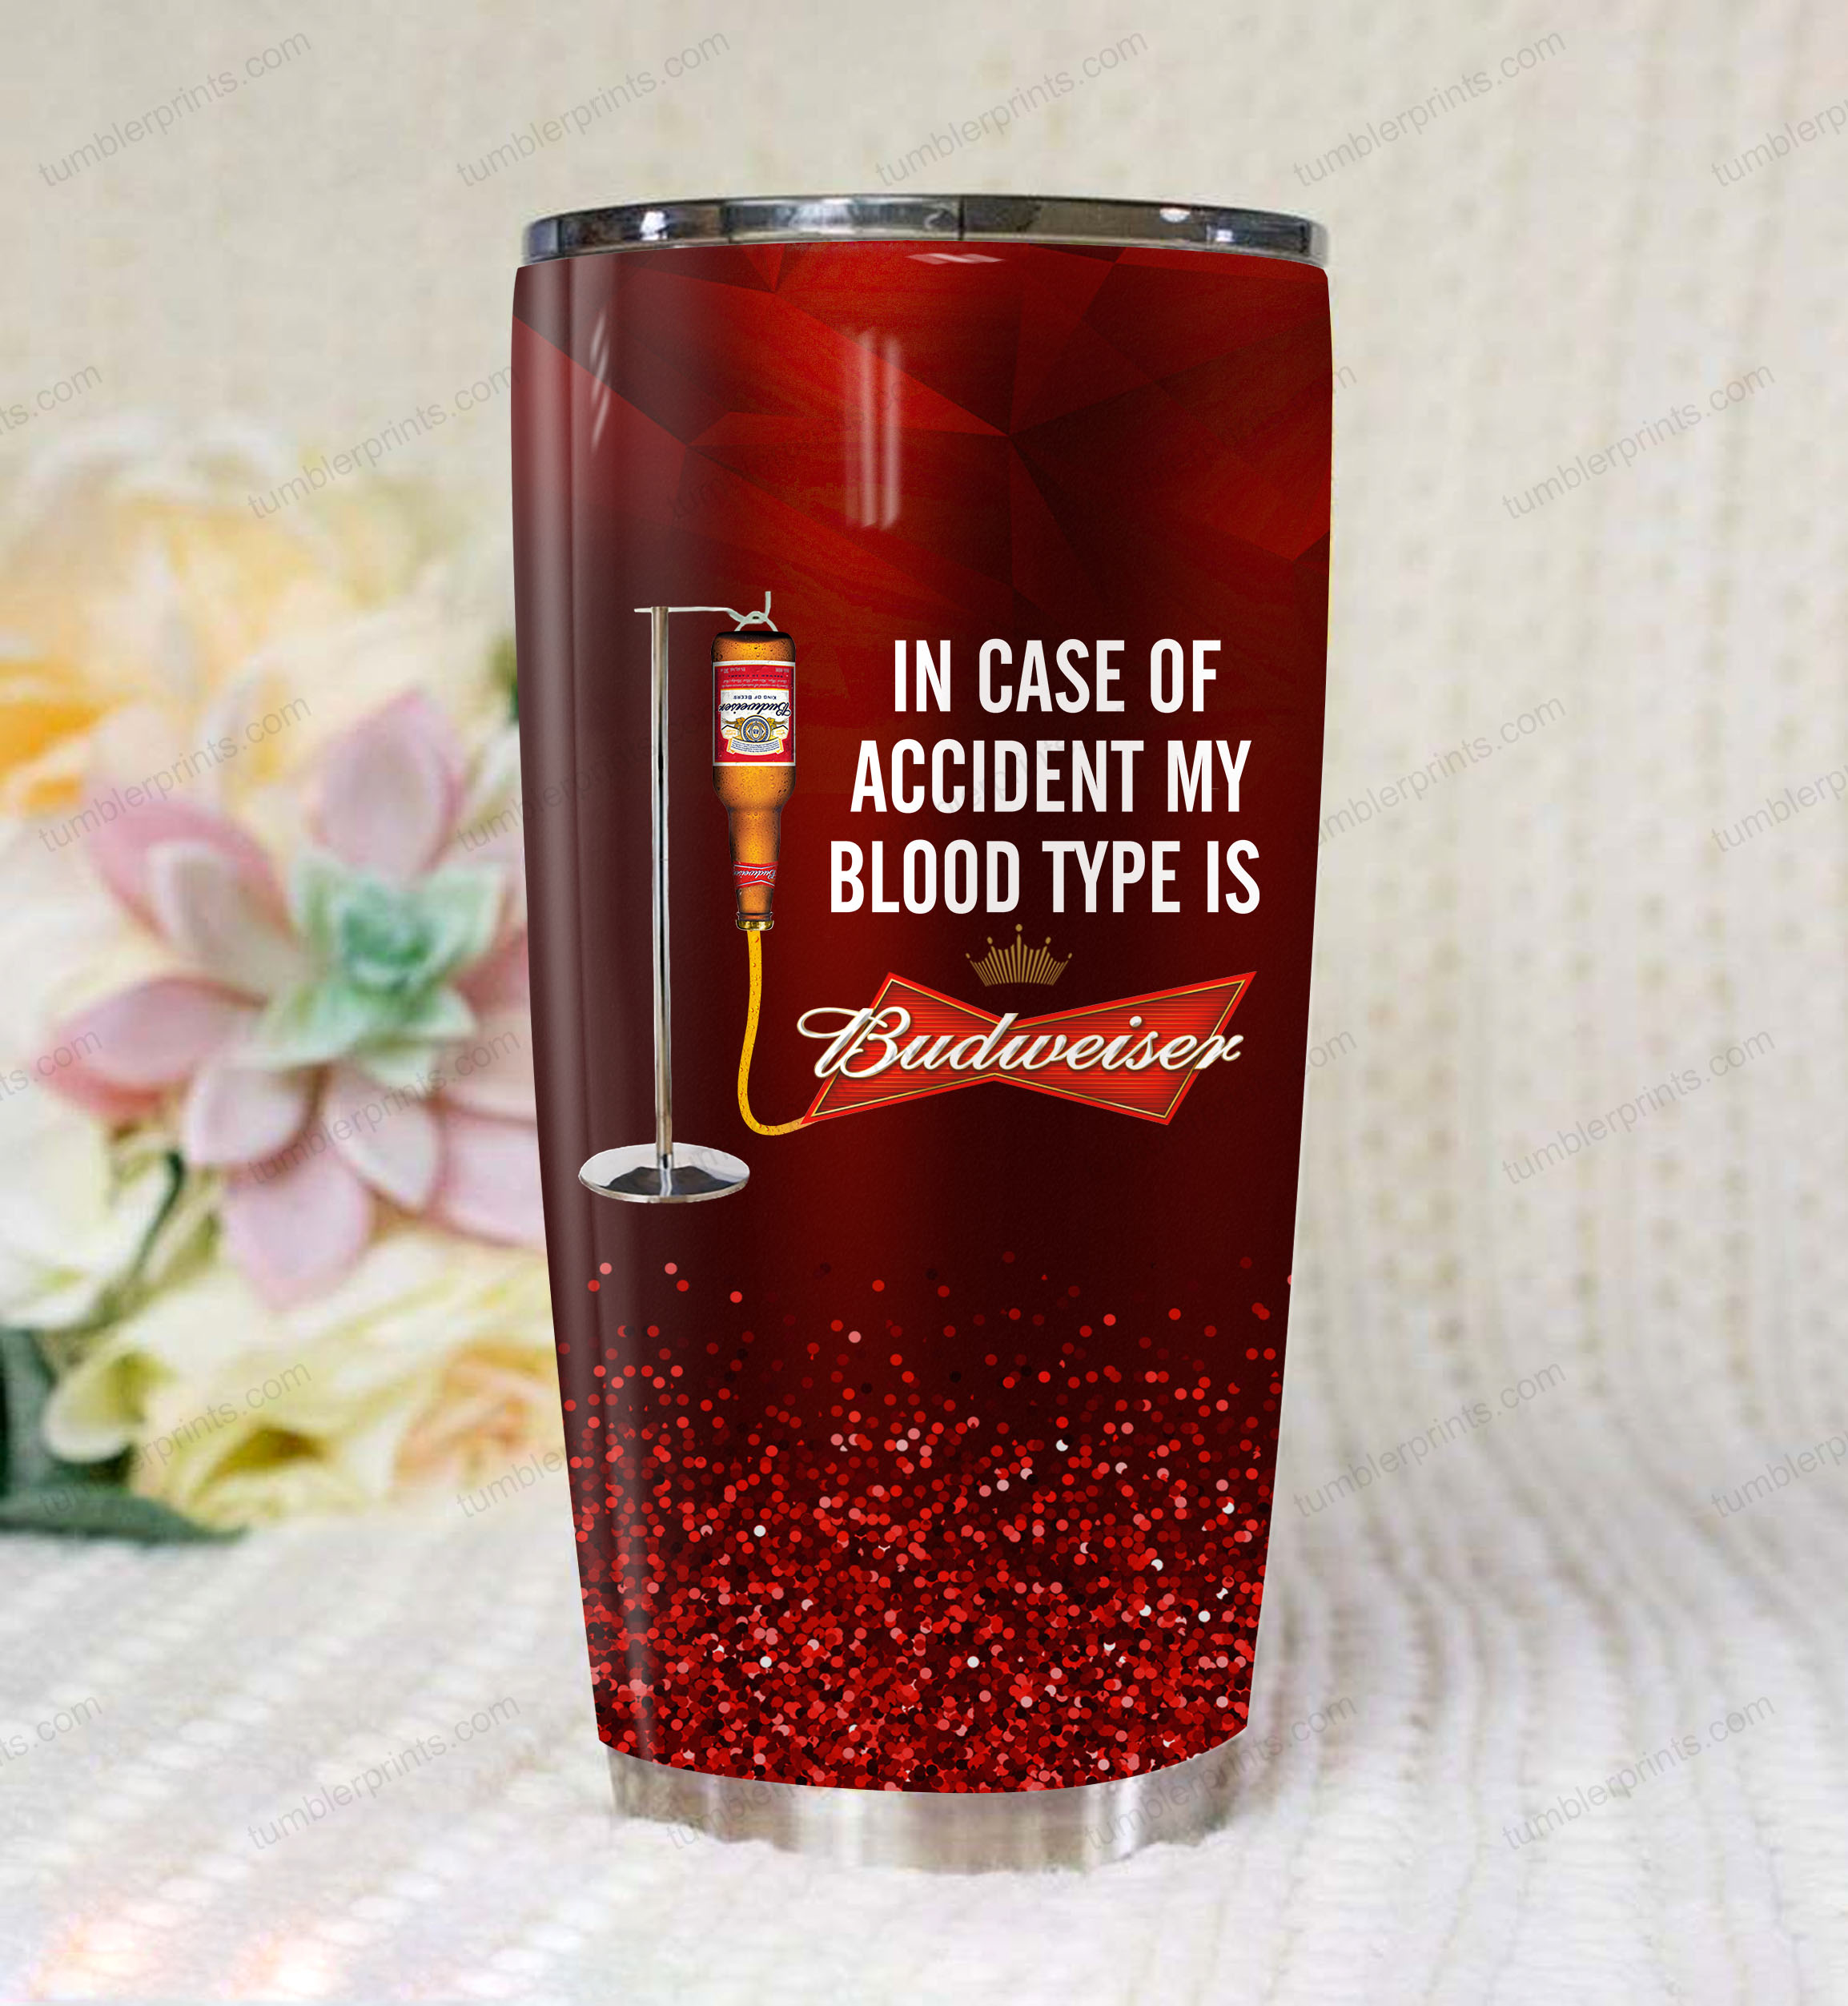 In case of an accident my blood type is budweiser full printing tumbler 4